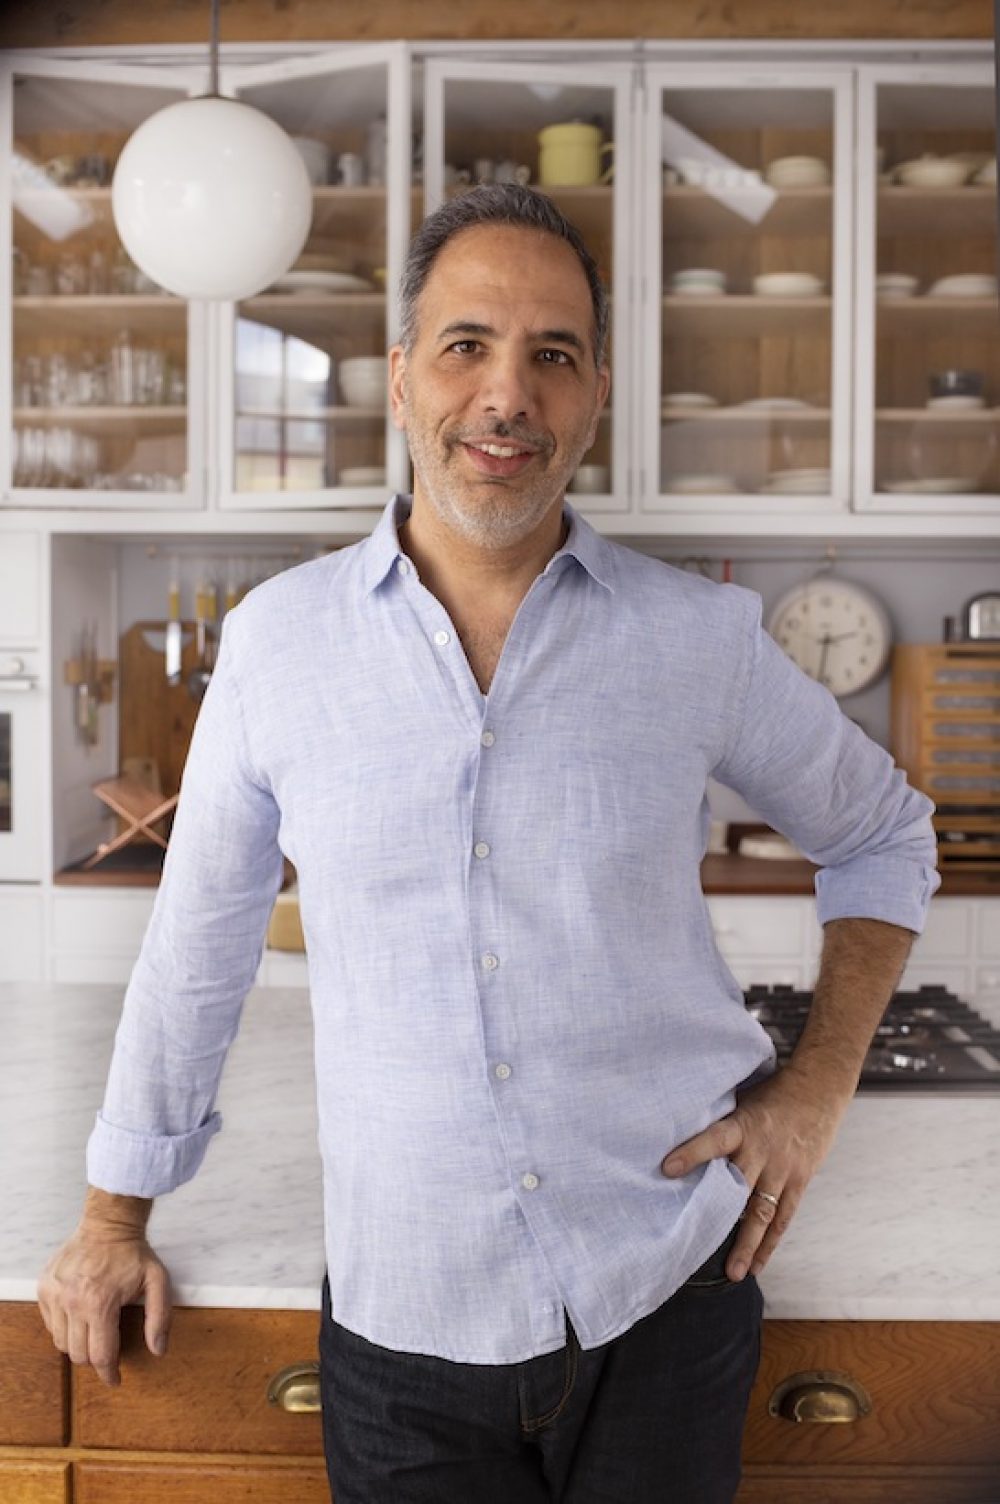 Yotam Ottolenghi Talks “Fusion” and Food Styling on Our Podcast